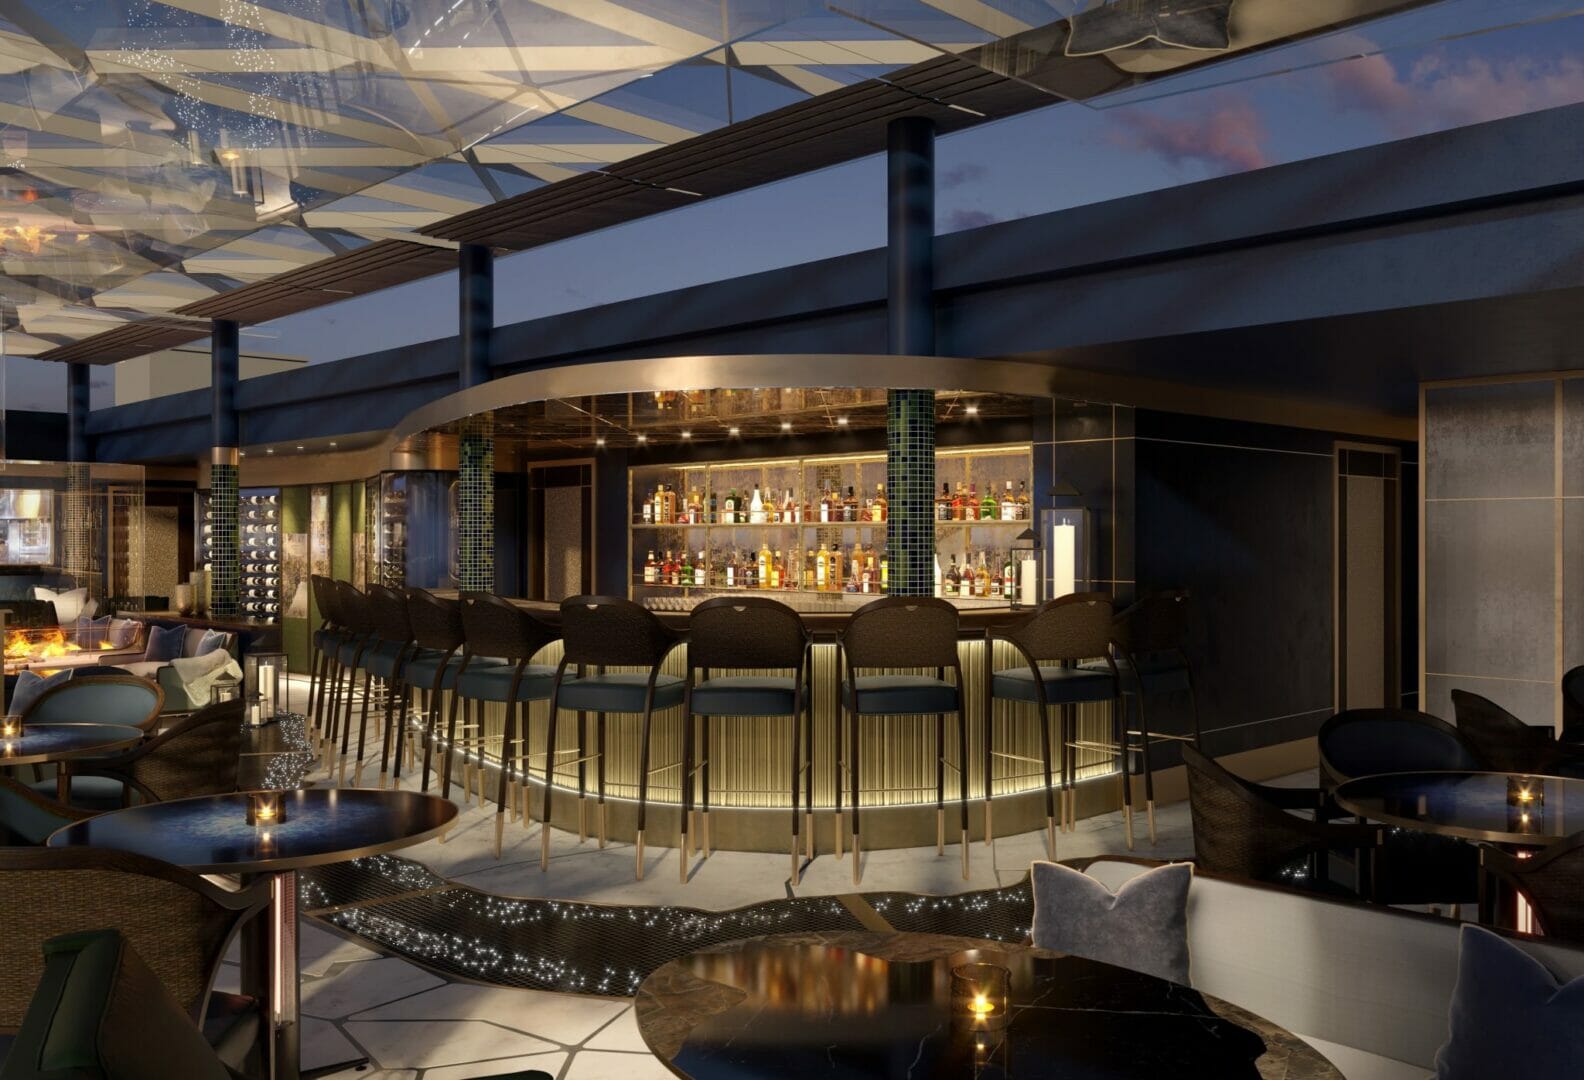 A New Luxury Hotel And Destination Rooftop Terrace On Albert Embankment: Crowne Plaza London – Albert Embankment, Opening May 2018